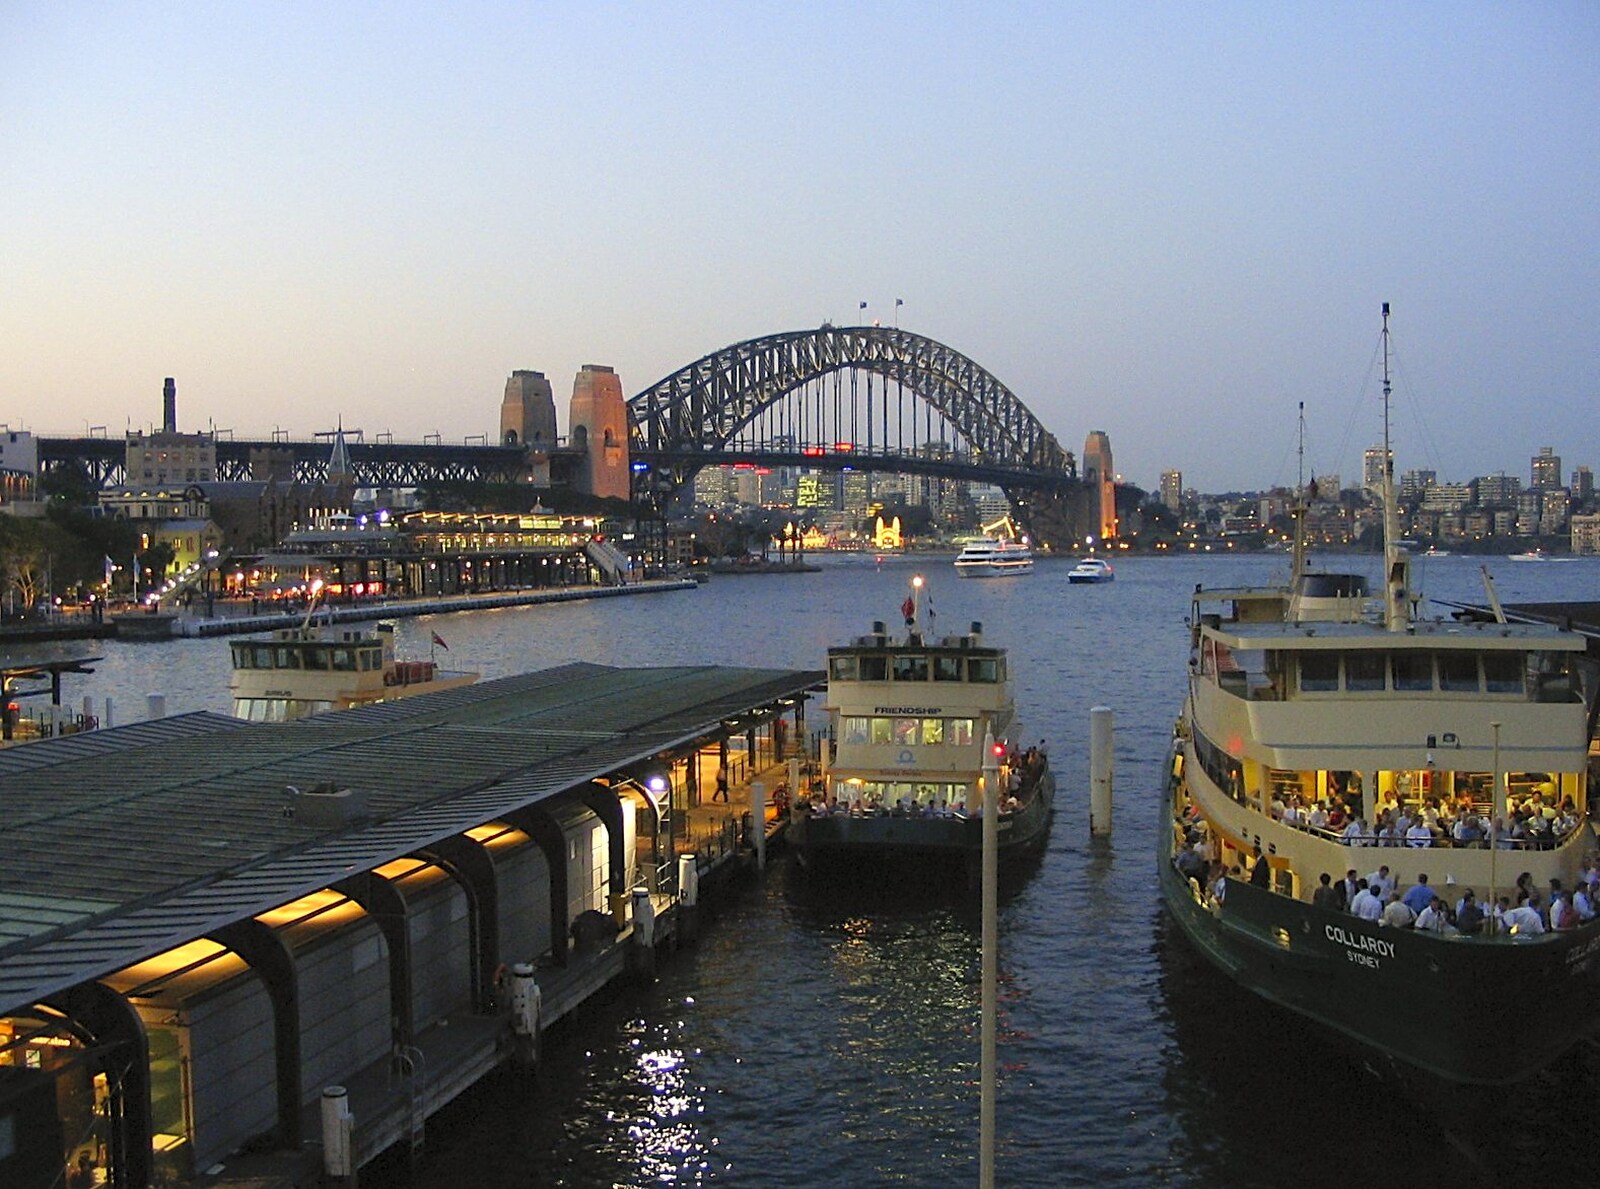 The ferry terminal at Circular Quay from Sydney, New South Wales, Australia - 10th October 2004